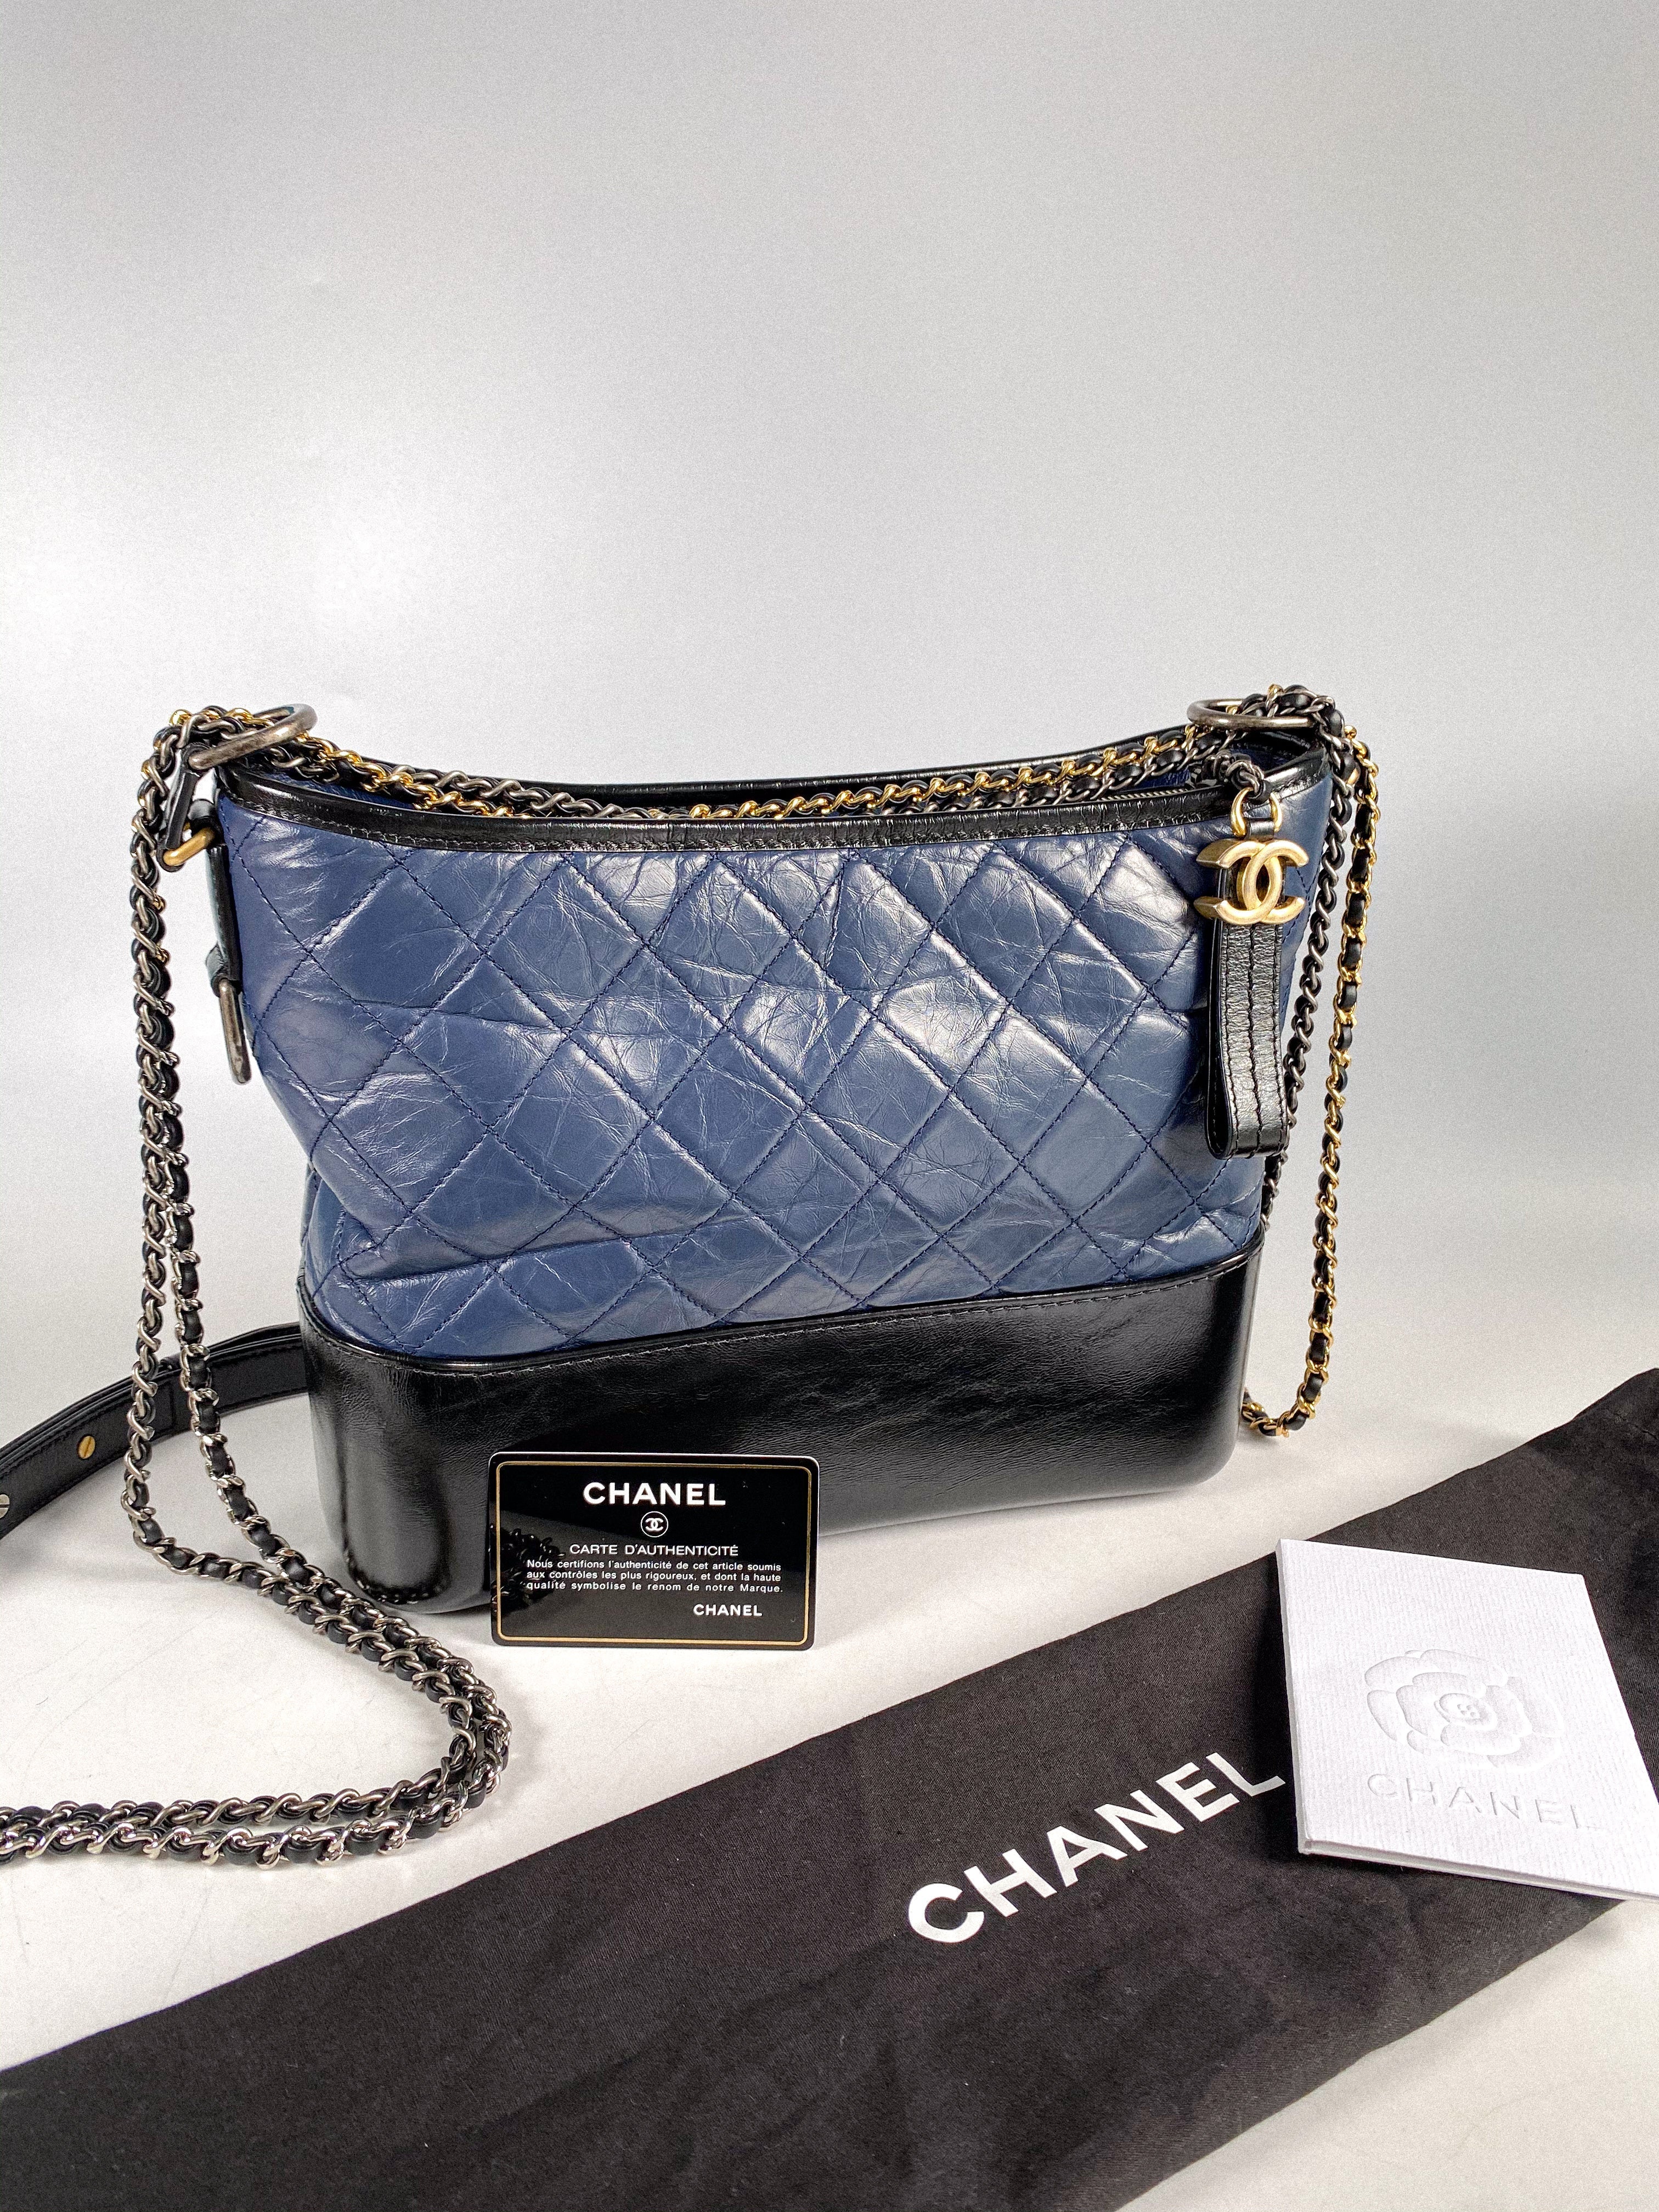 Chanel Gabrielle Medium Hobo Bag in Navy Blue Distressed Calfskin Leather & Mixed Hardware (Series 26)